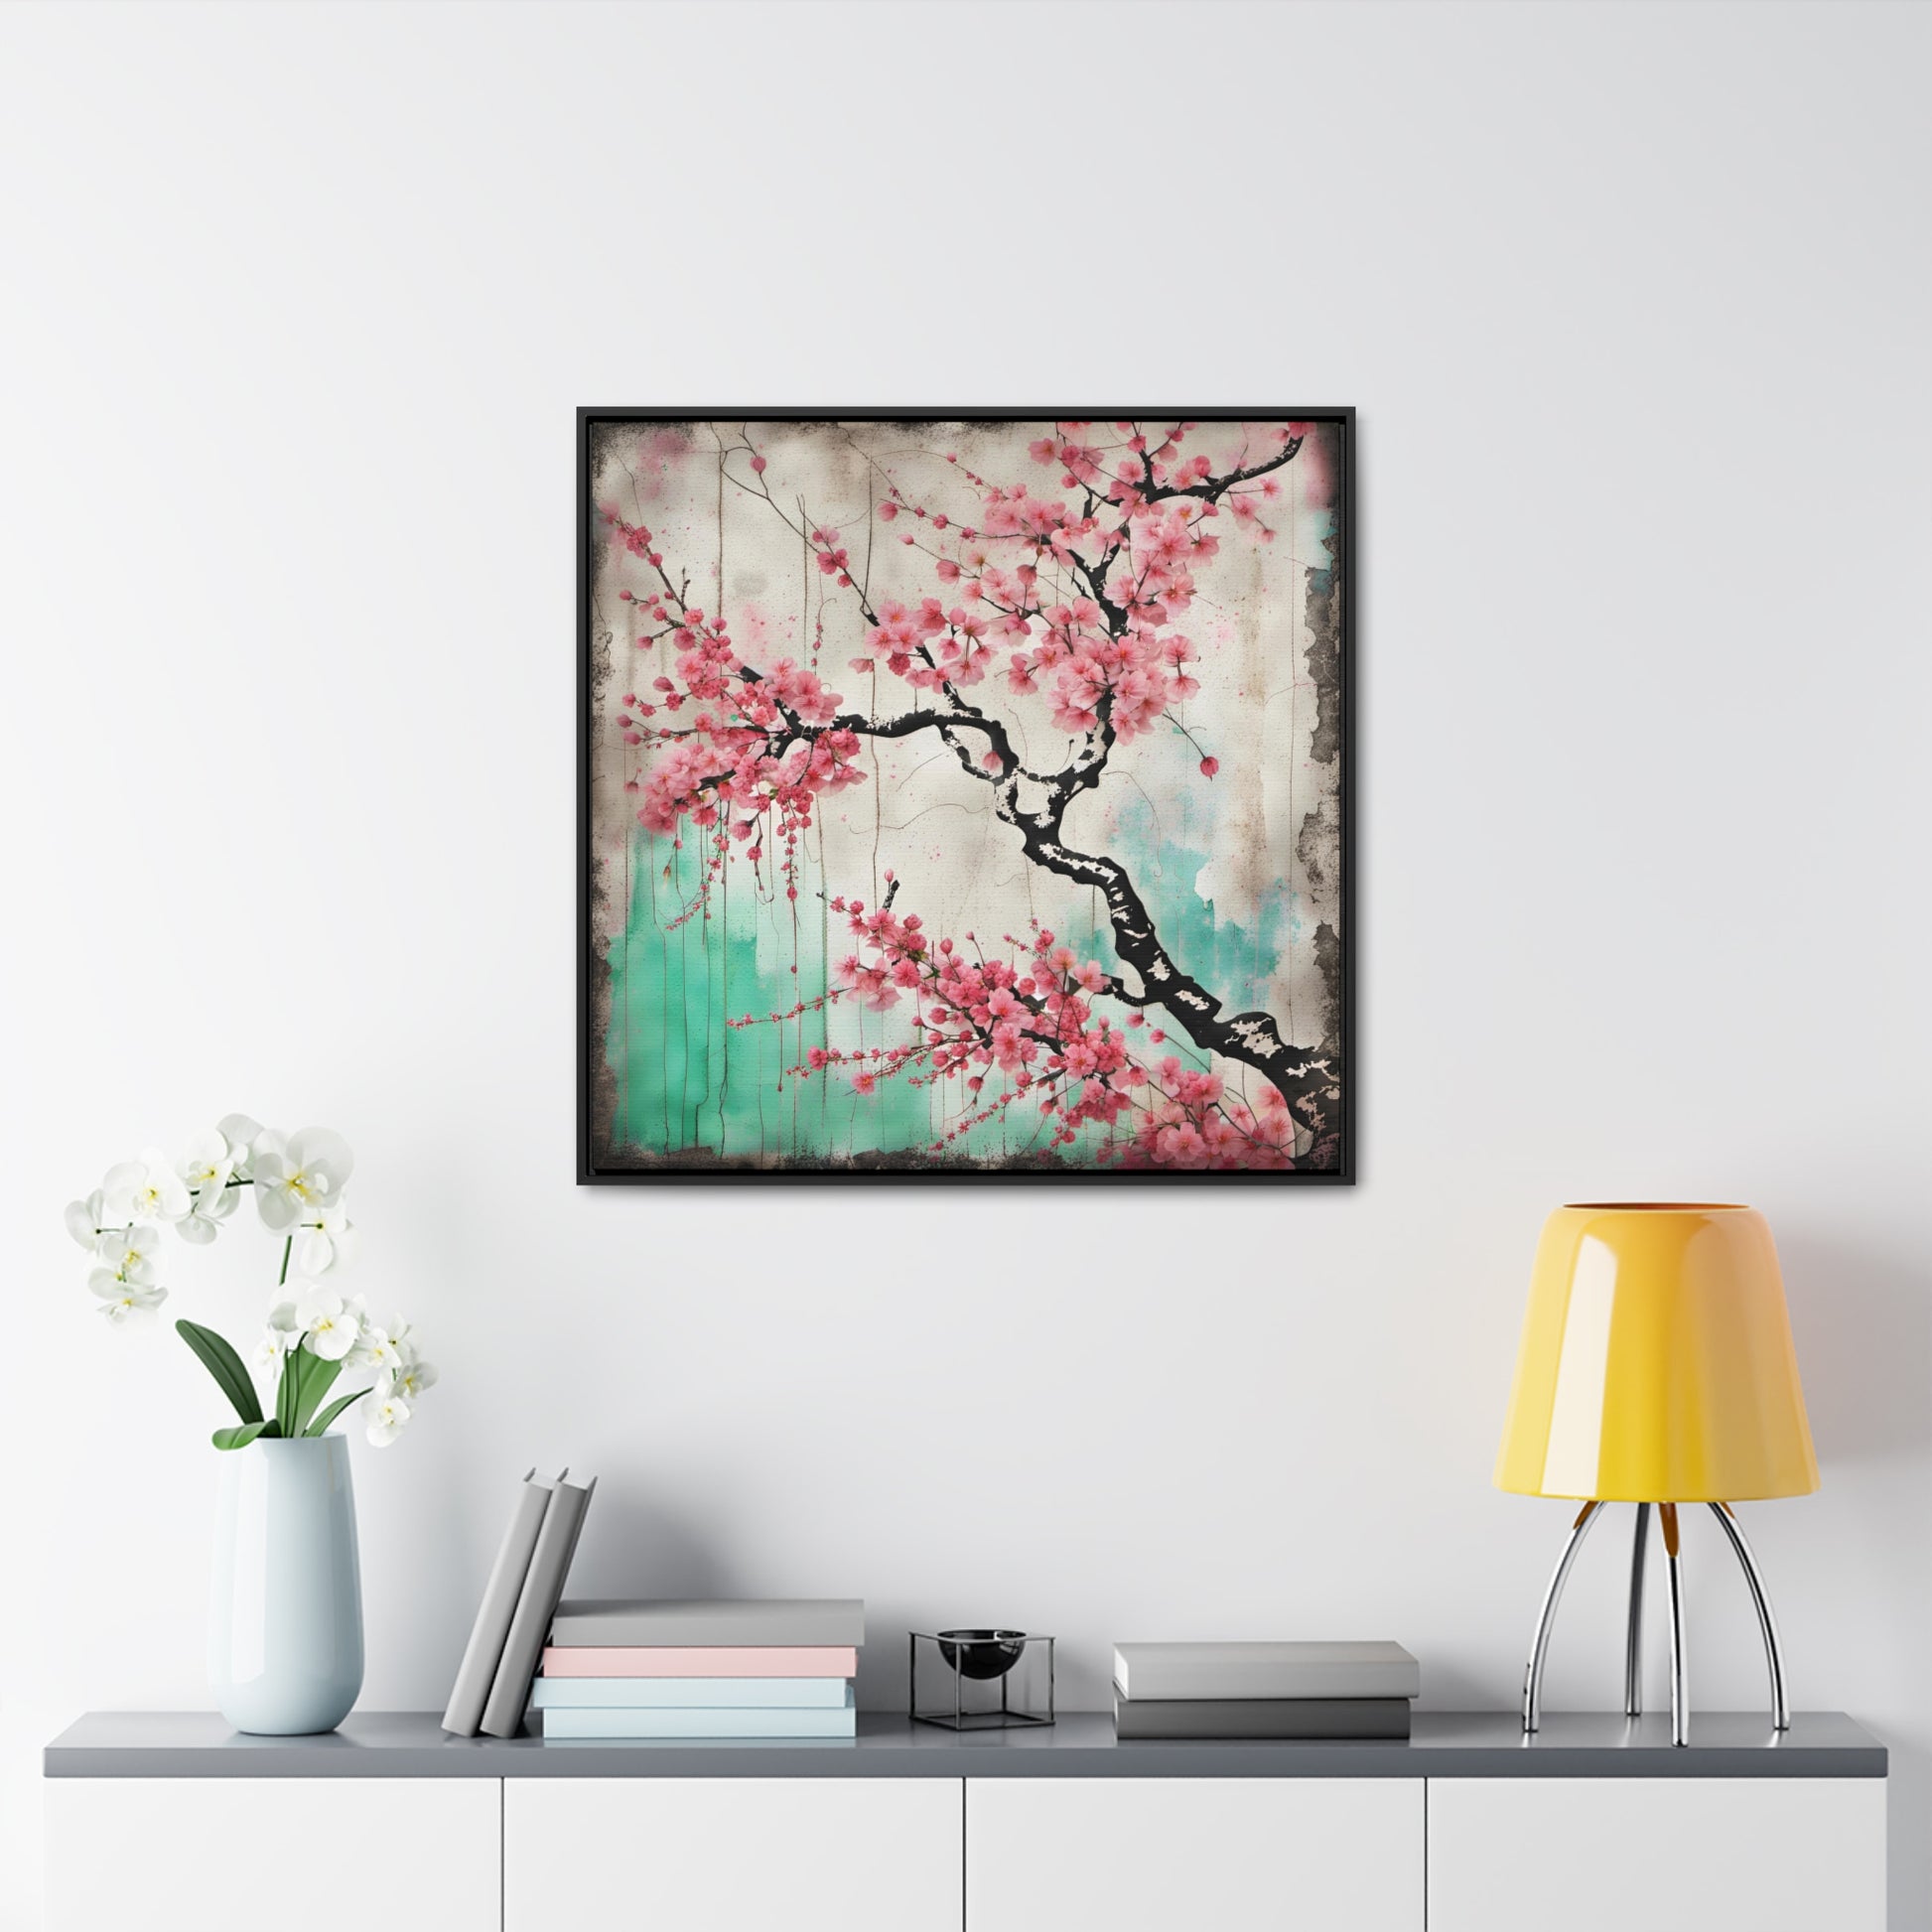 Cherry Blossoms Street Art Style Print on Canvas in a Floating Frame 30x30